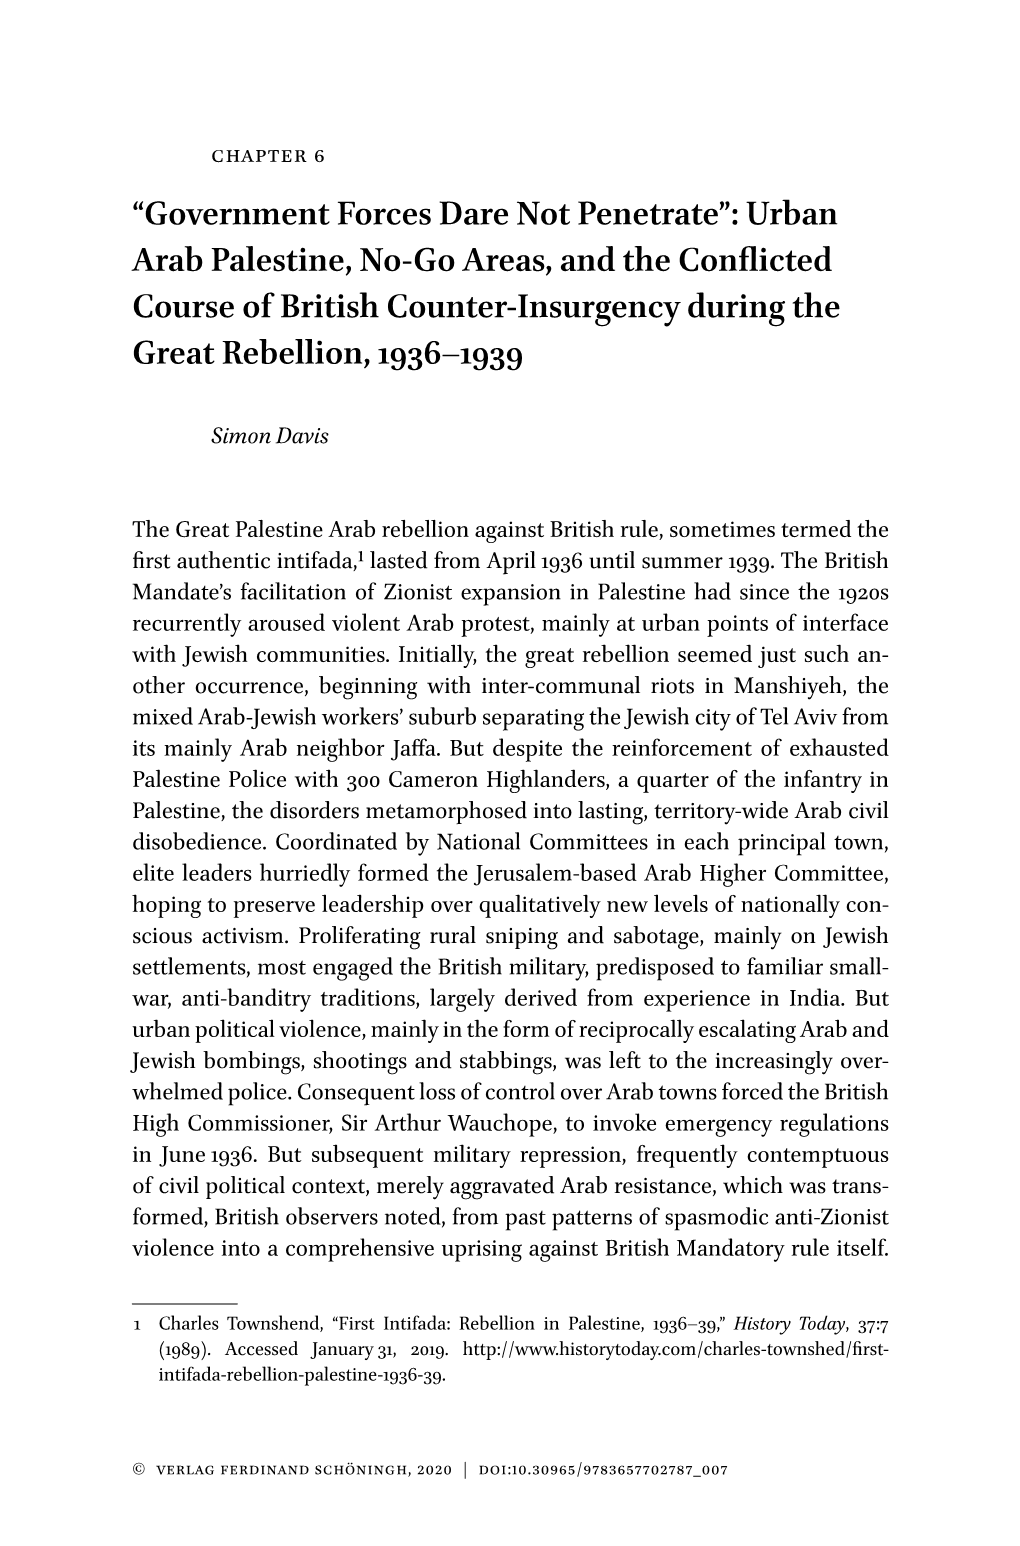 Urban Arab Palestine, No-Go Areas, and the Conflicted Course of British Counter-Insurgency During the Great Rebellion, 1936–1939